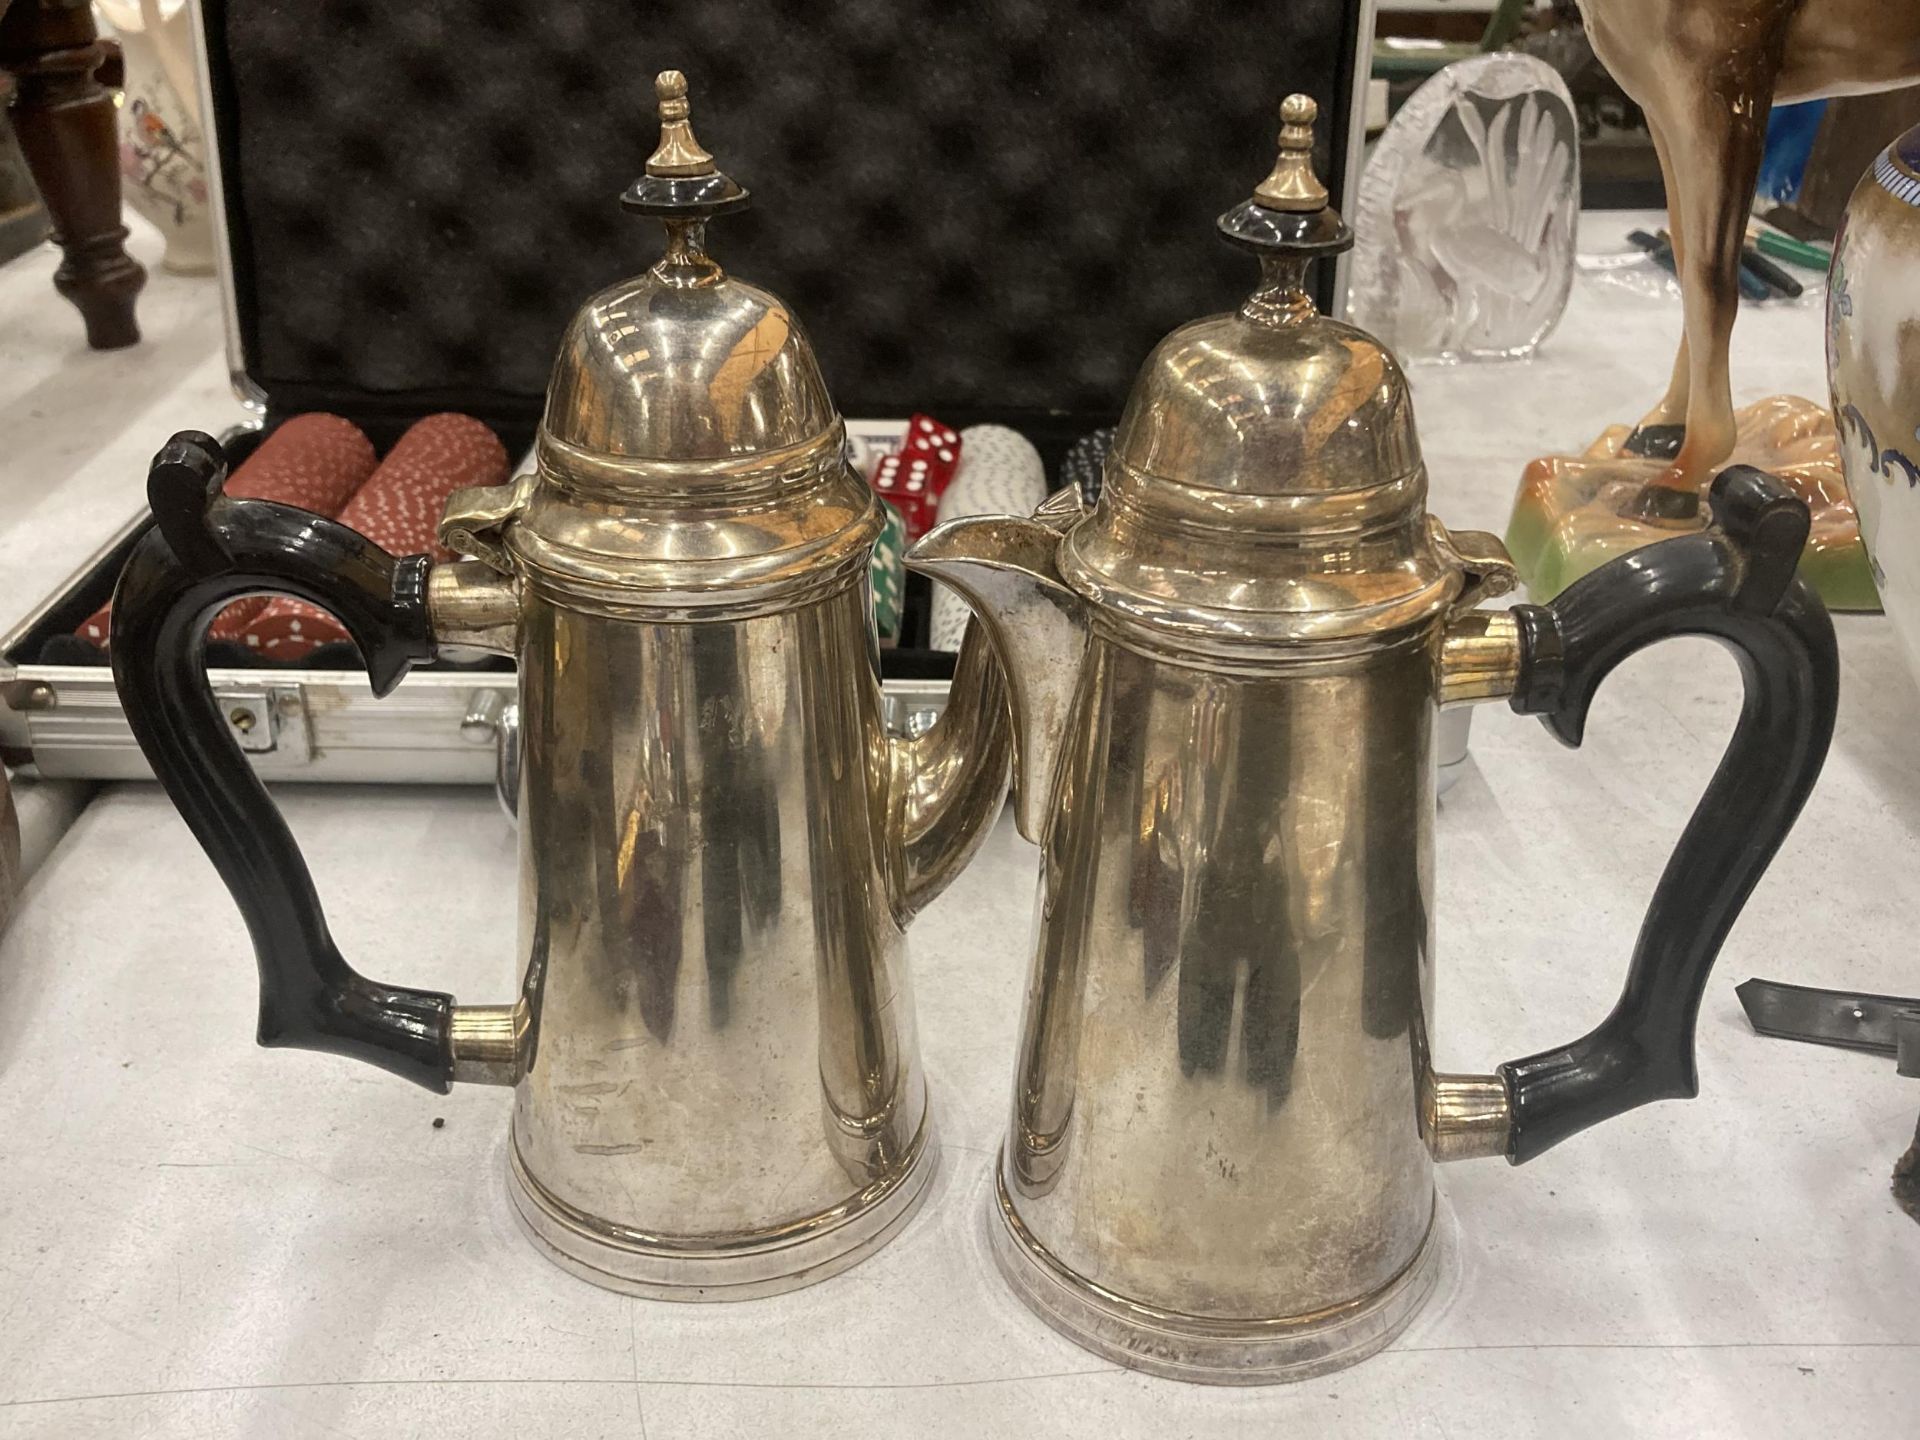 TWO VINTAGE SILVER PLATED HOT CHOCOLATE JUGS HEIGHT 21.5CM